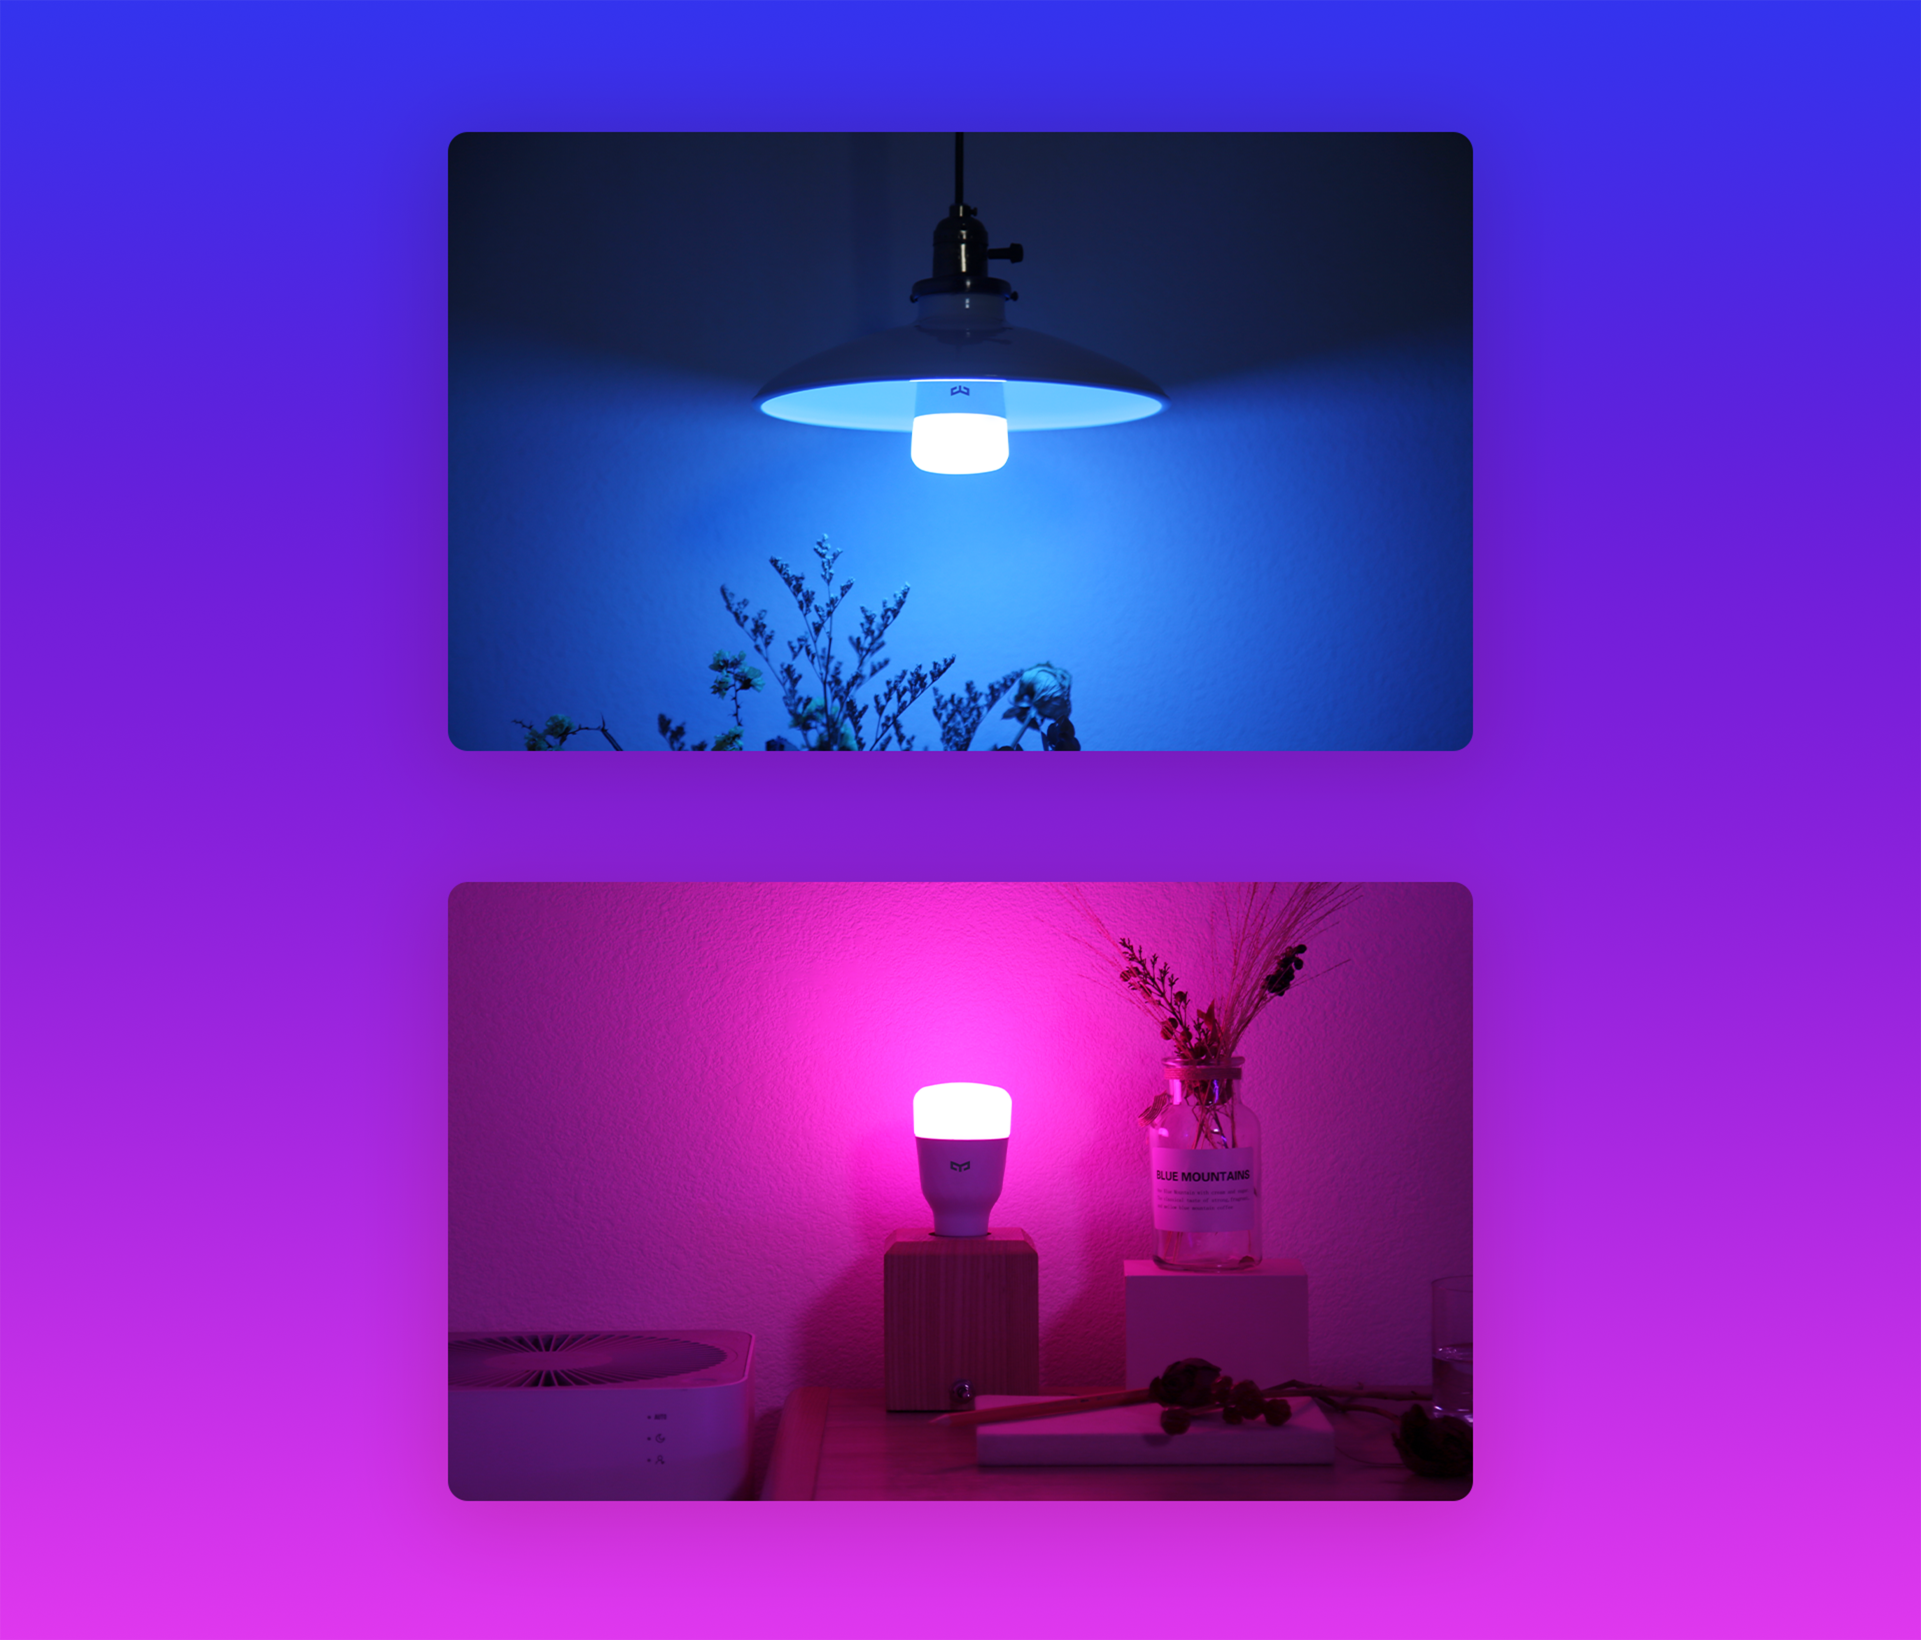 En 06 Xiaomi The Yeelight 1S Rgb Smart Light Bulb Will Allow You To Create Your Own Smart Home. You Can Control It With Your Voice Or Application And Decide With What Temperature And Power It Should Shine. Luminous Flux: 800Lm Color Temperature: 1700K-6500K Lamp Holder: E27 Rated Power: 8.5W &Nbsp; 16 Million Colors Wifi Enabled, Voice Control, App Control, Music Sync &Lt;Img Class=&Quot;Alignnone Wp-Image-8061 Size-Full&Quot; Src=&Quot;Https://Lablaab.com/Wp-Content/Uploads/2020/04/Bulb-27-2-Scaled.jpg&Quot; Alt=&Quot;&Quot; Width=&Quot;2560&Quot; Height=&Quot;357&Quot; /&Gt; &Nbsp; Yeelight Smart Bulb Yeelight Smart Bulb 1S (Color)